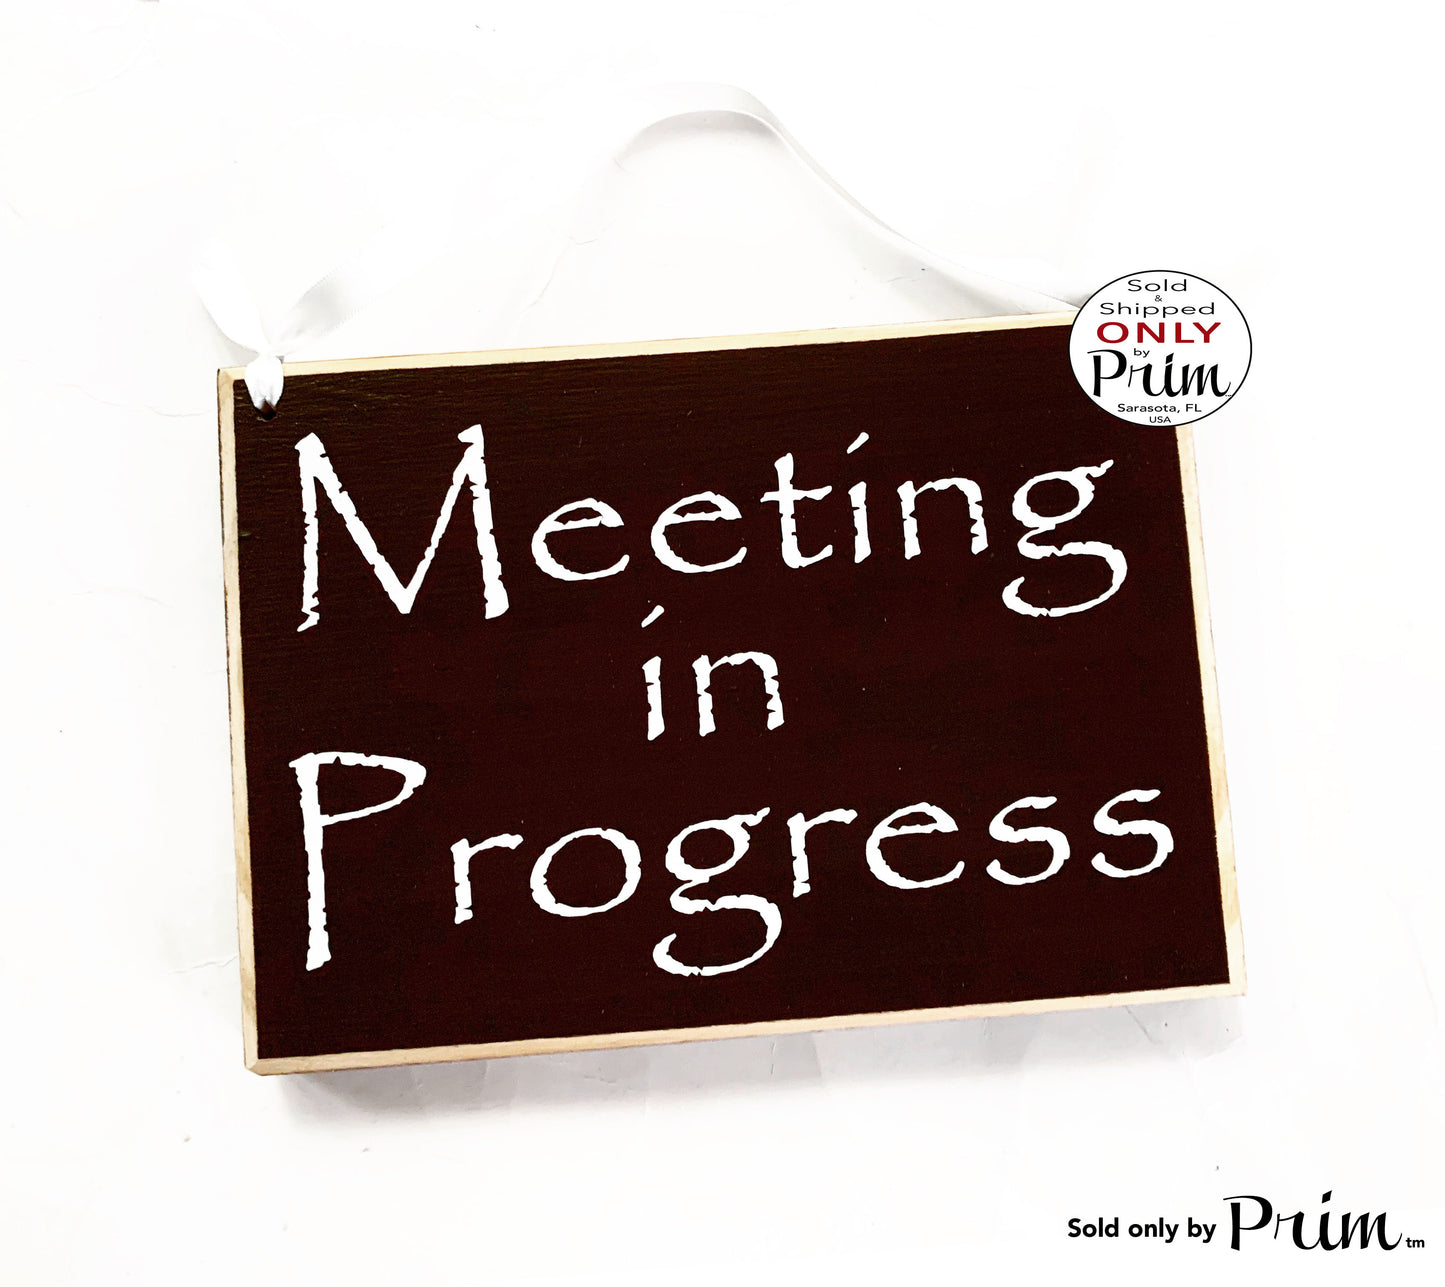 8x6 Meeting In Progress Custom Wood Sign In Session Please Do Not Disturb Business Office Conference Do Not Enter Busy Corporate Door Plaque